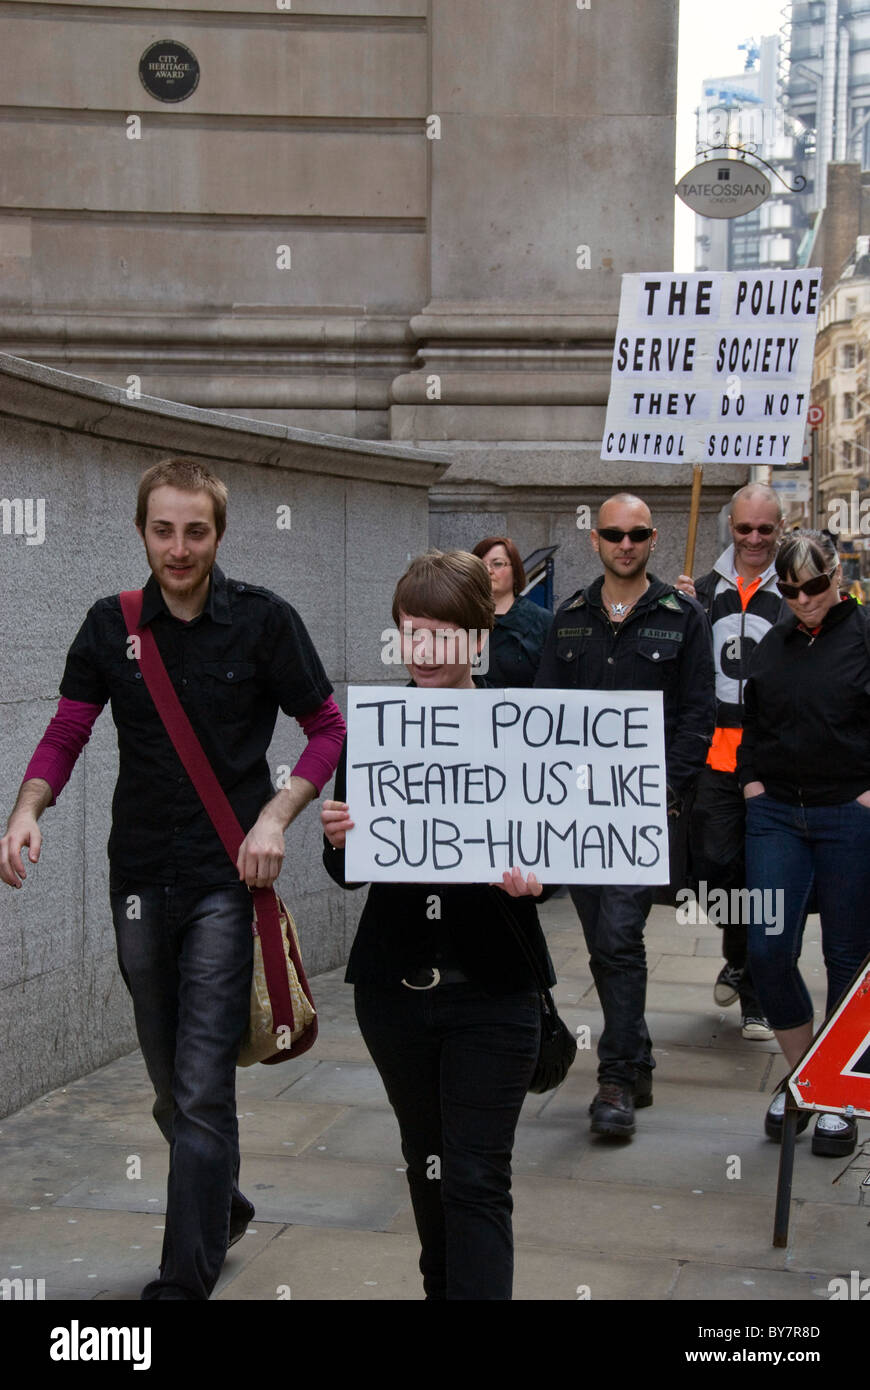 Demonstration in central London against police brutality Stock Photo